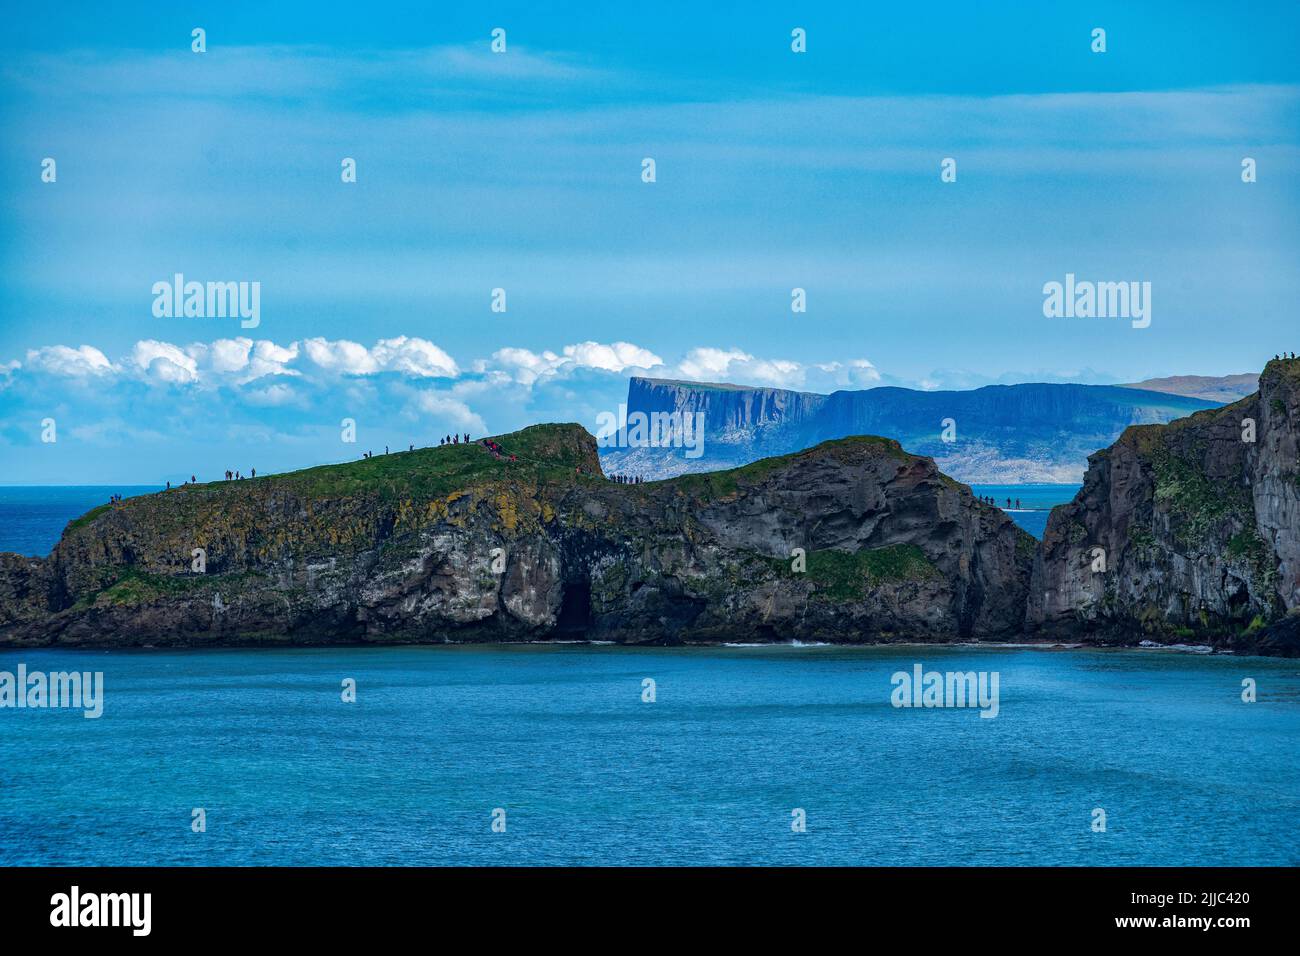 View of Carrick-a-Rede rope bridge from a distance with the dramatic cliffs of Fair Head in the dstance, North Coast, County Antrim, Northern Ireland Stock Photo